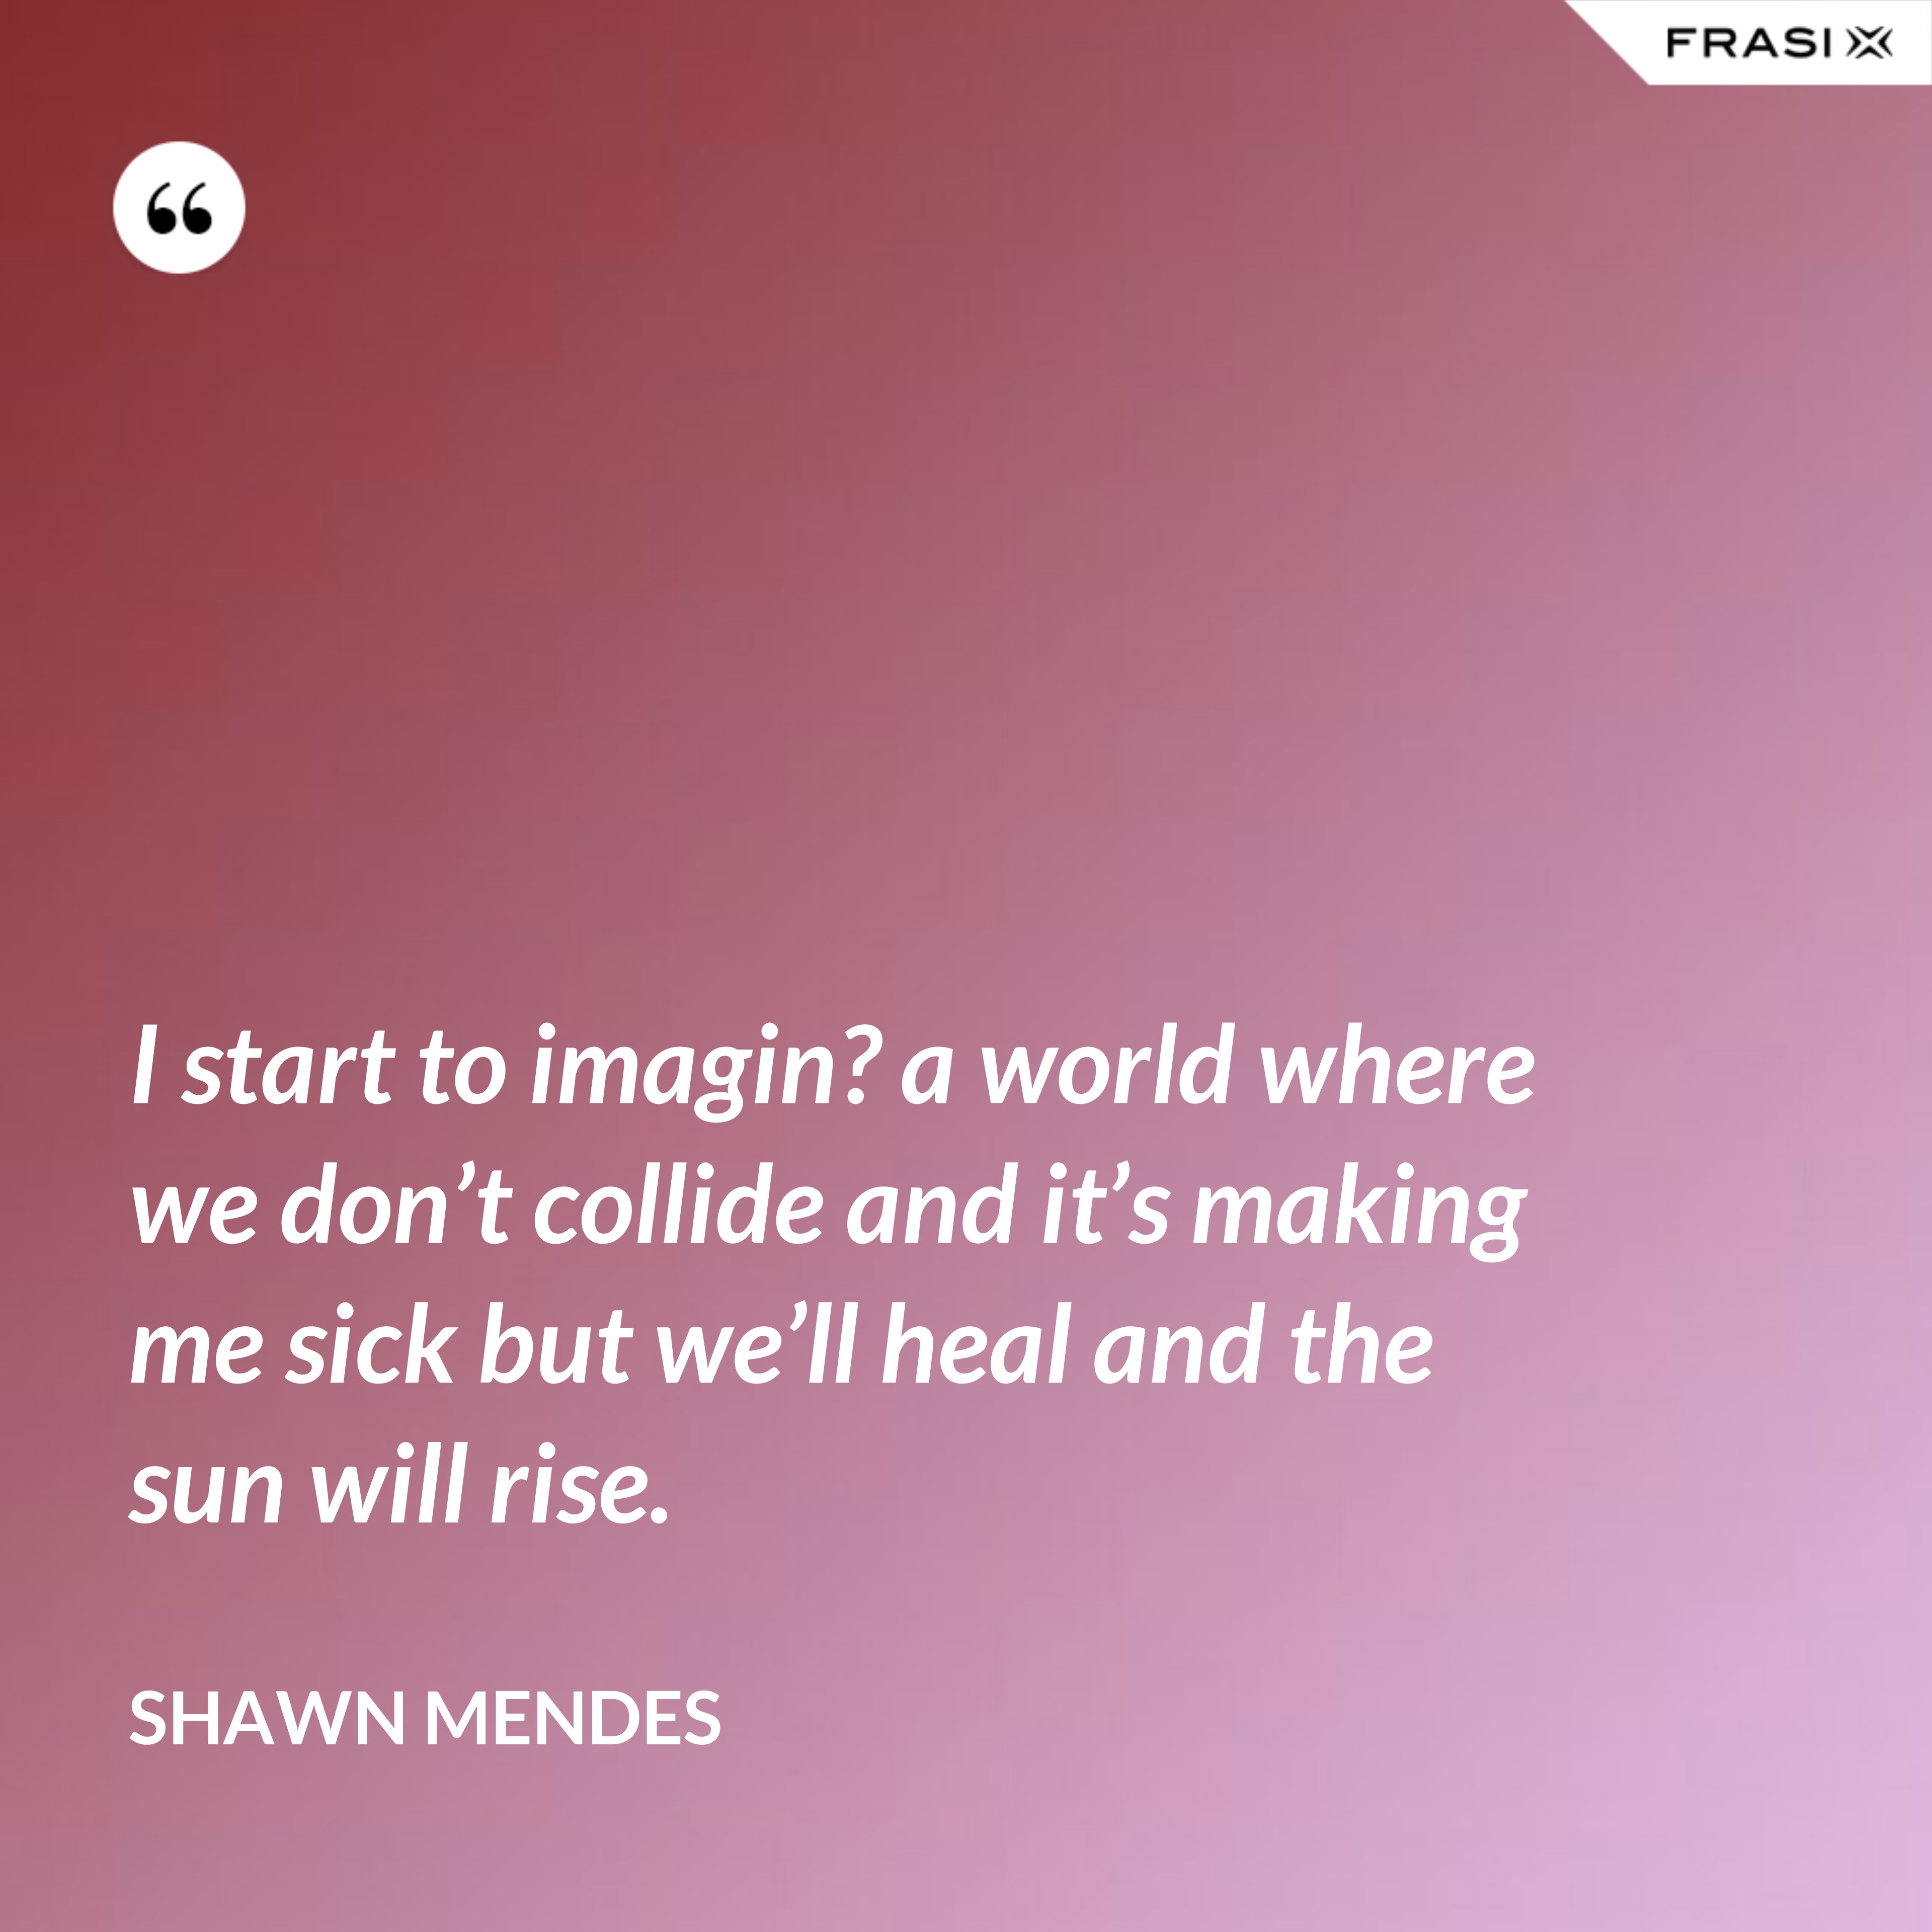 I start to imagin? a world where we don’t collide and it’s making me sick but we’ll heal and the sun will rise. - Shawn Mendes